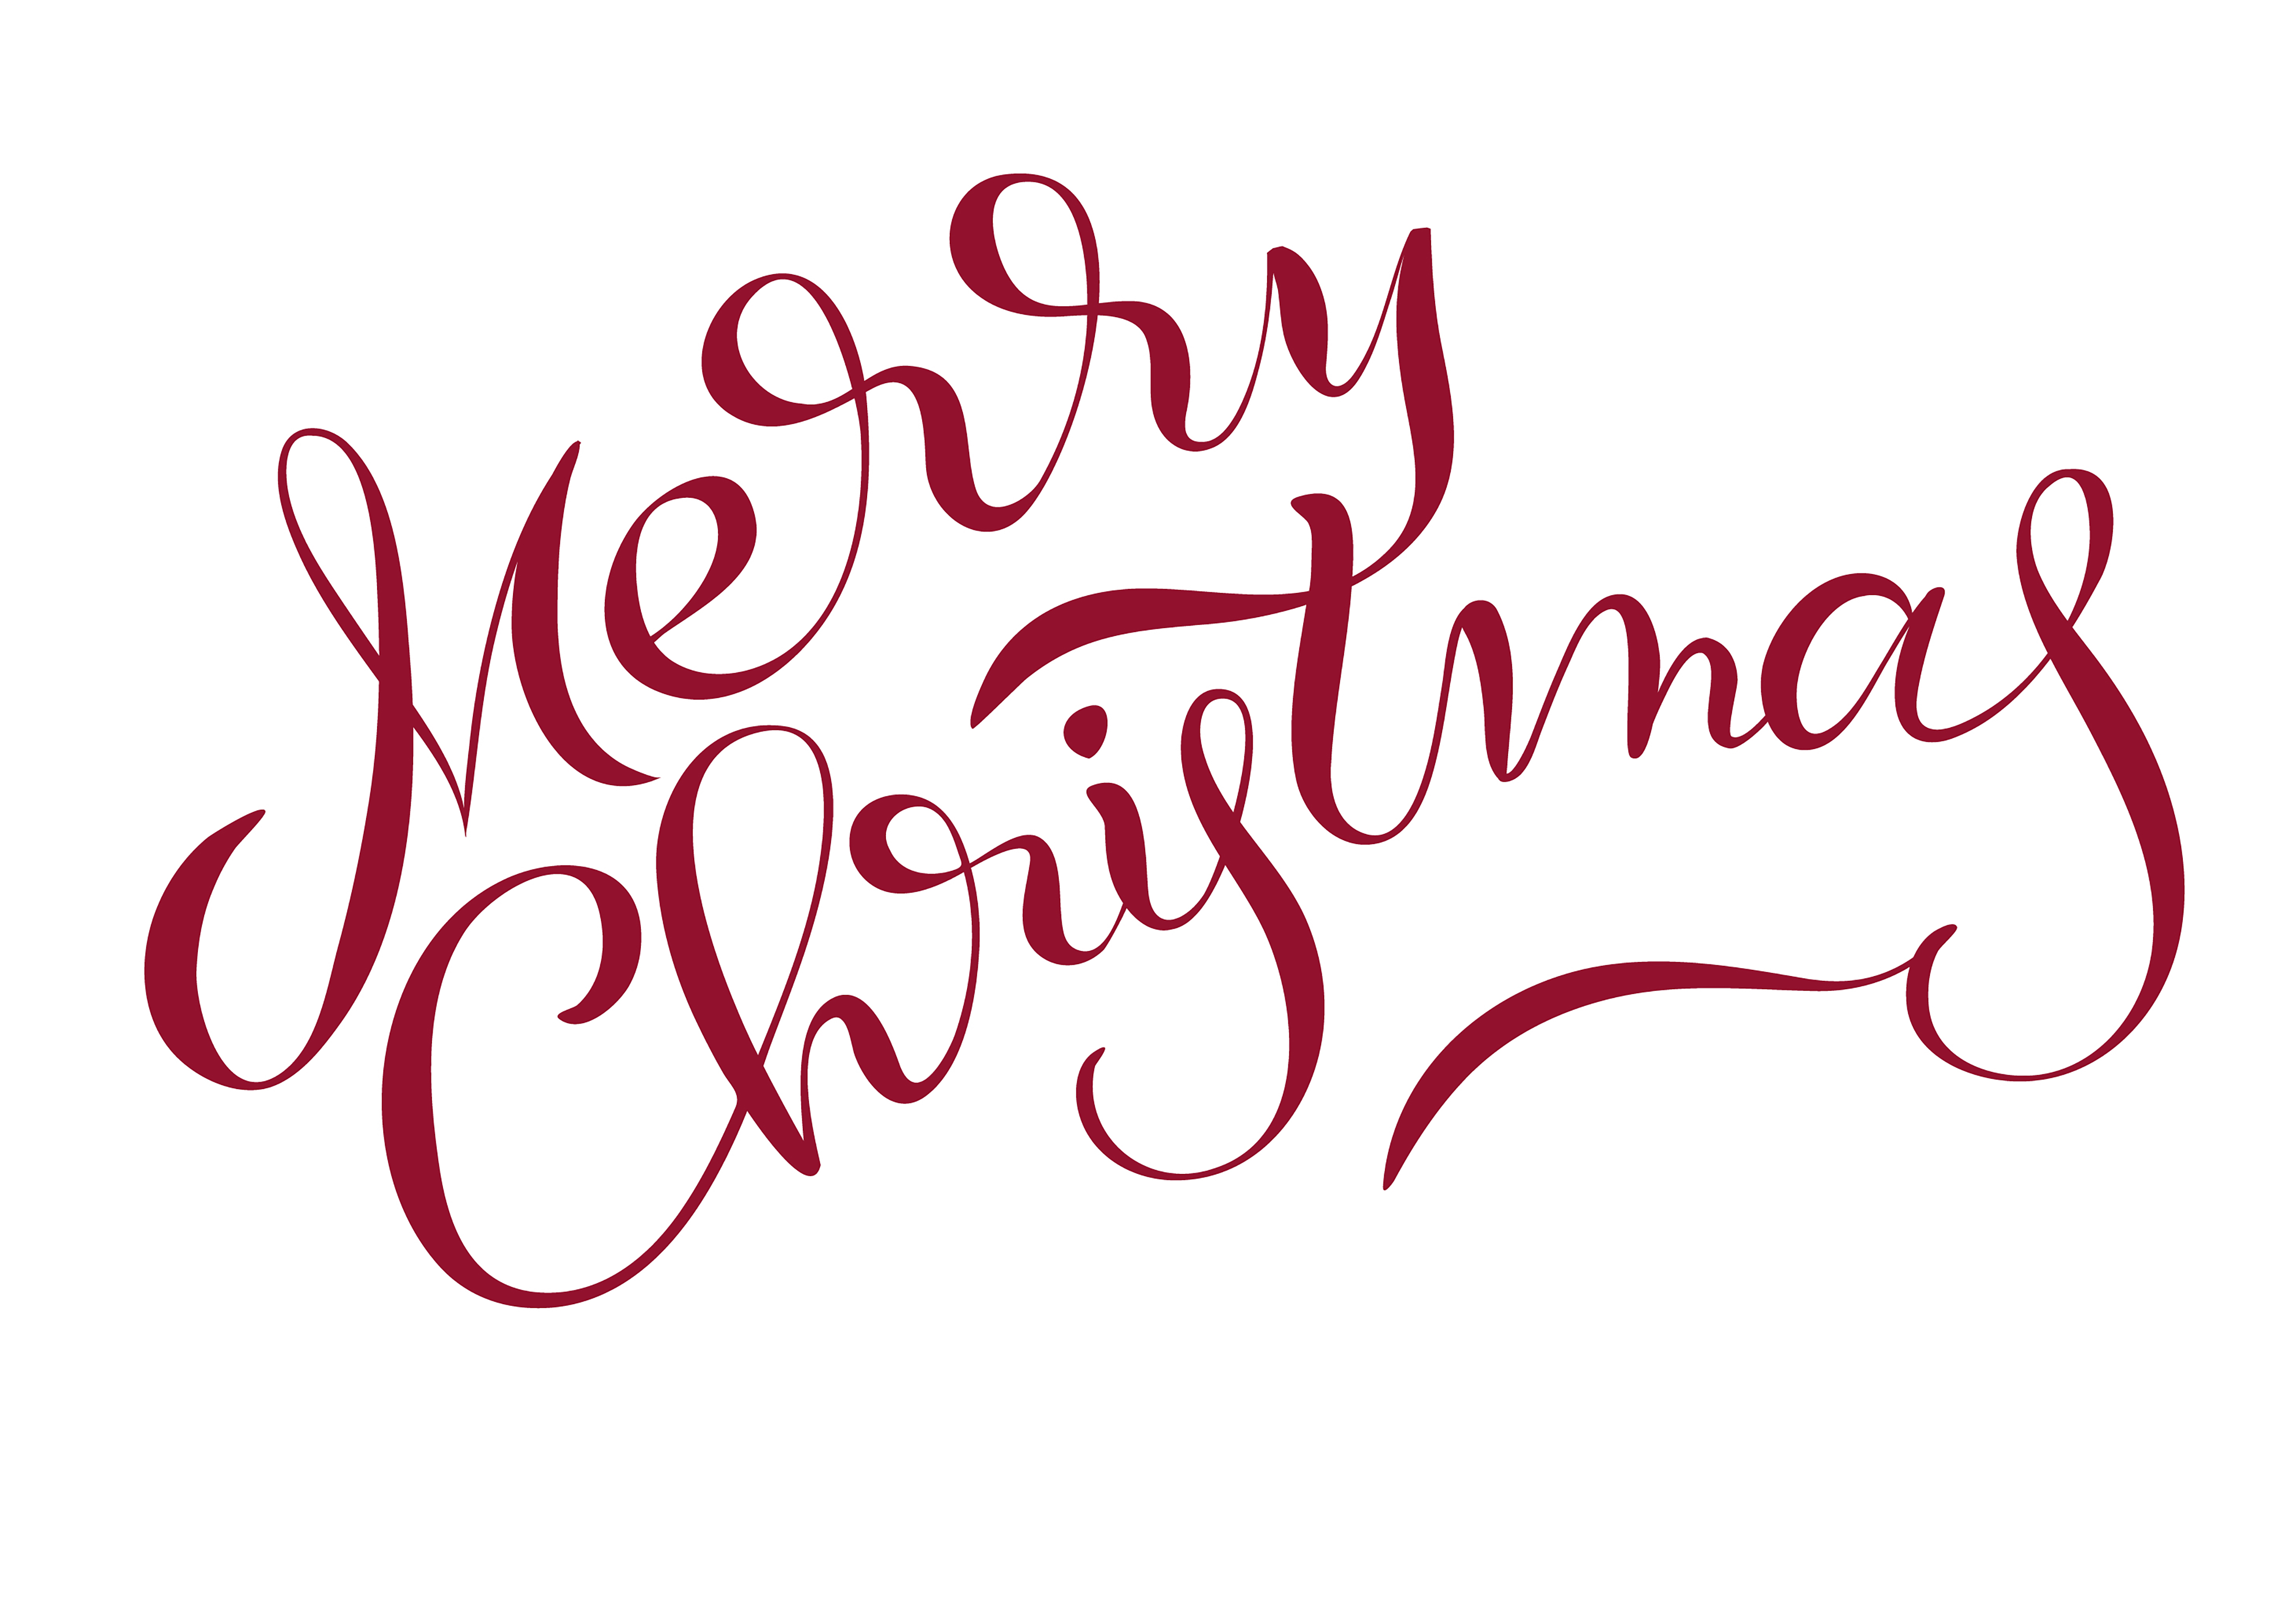 merry christmas text isolated on white background